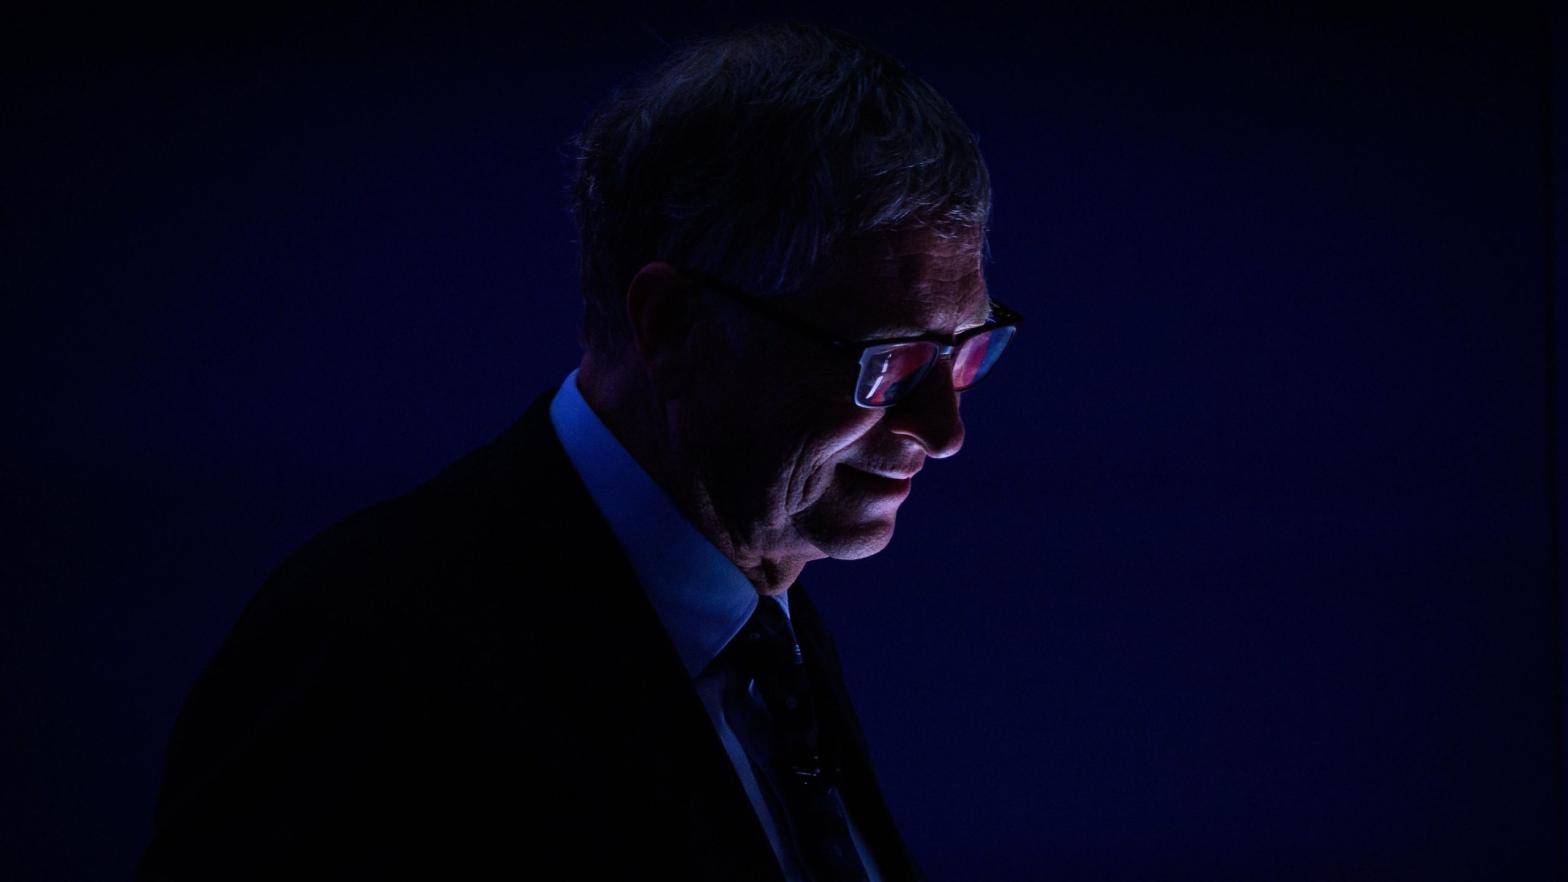 Bill Gates attends the Global Investment Summit at the Science Museum on October 19, 2021 in London, England. (Photo: Leon Neal, Getty Images)